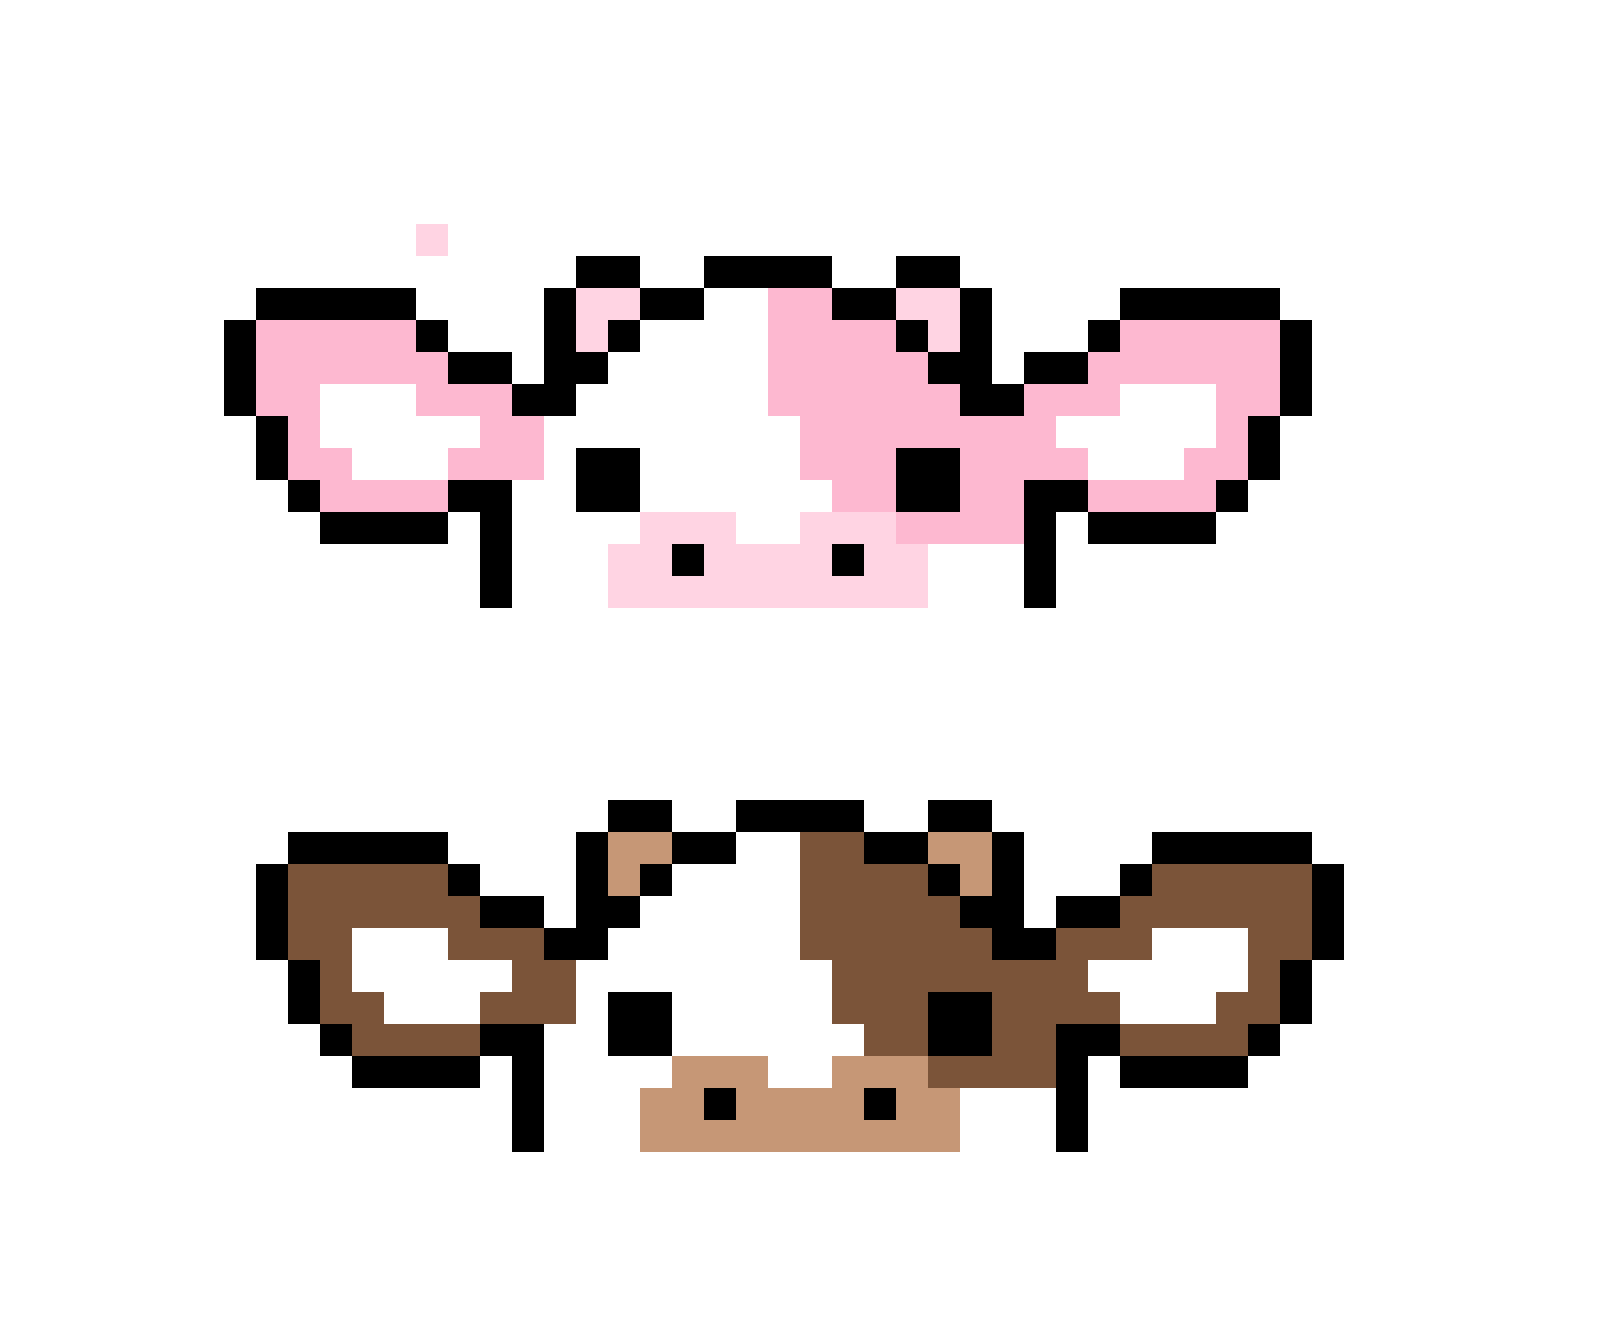 Strawberry and Chocolate cows 